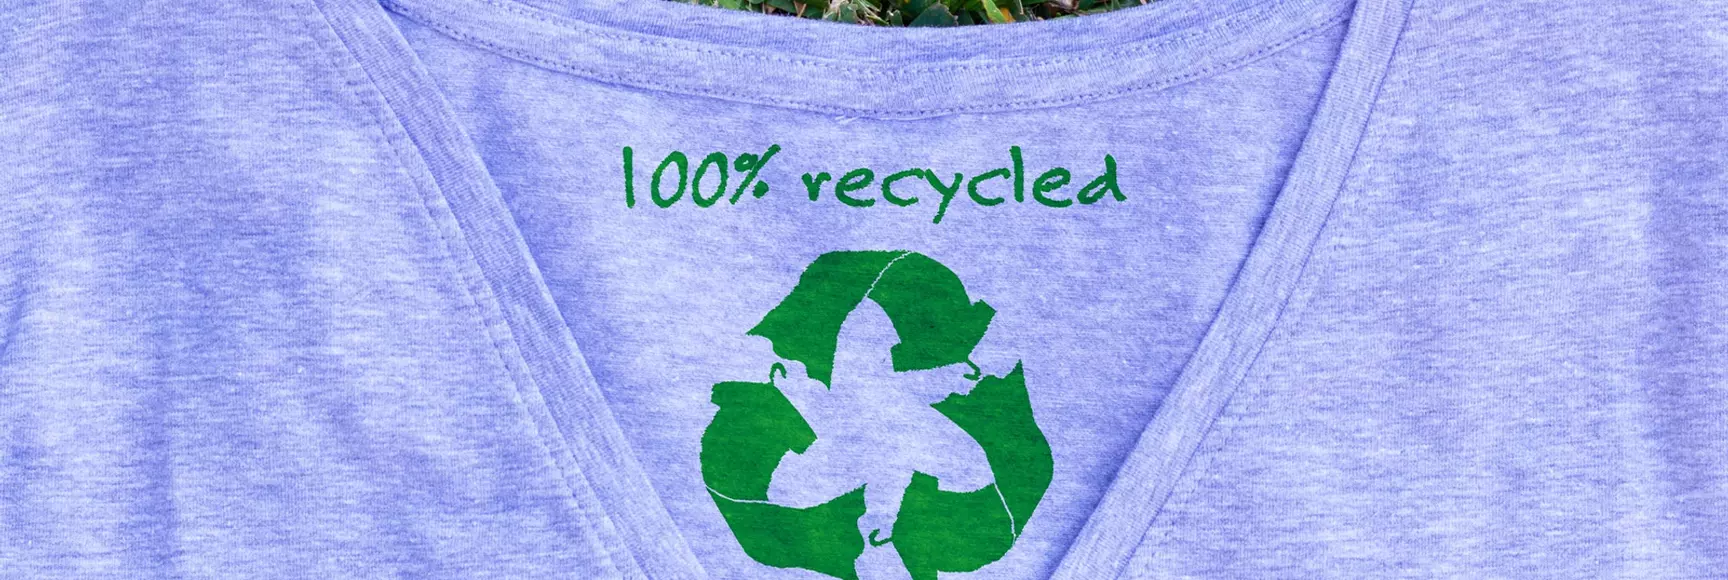 Sustainable fashion like this shirt made from 100% recycled materials can reduce waste and improve industry sustainability.